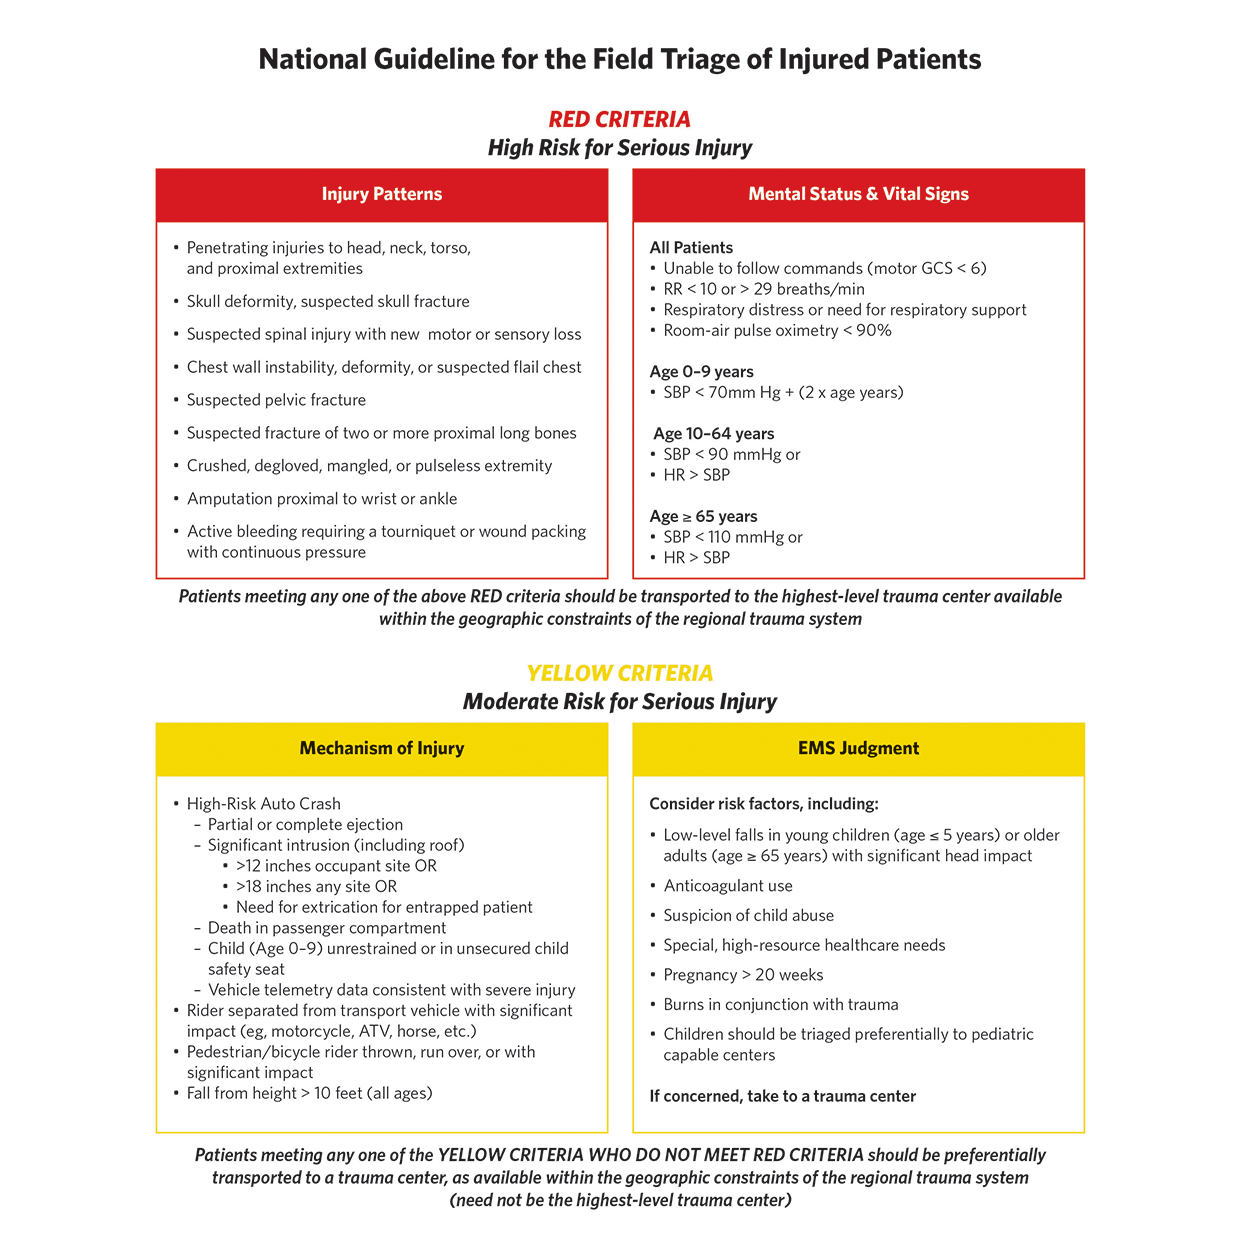 COT Releases Updated National Guideline for Field Triage of Injured